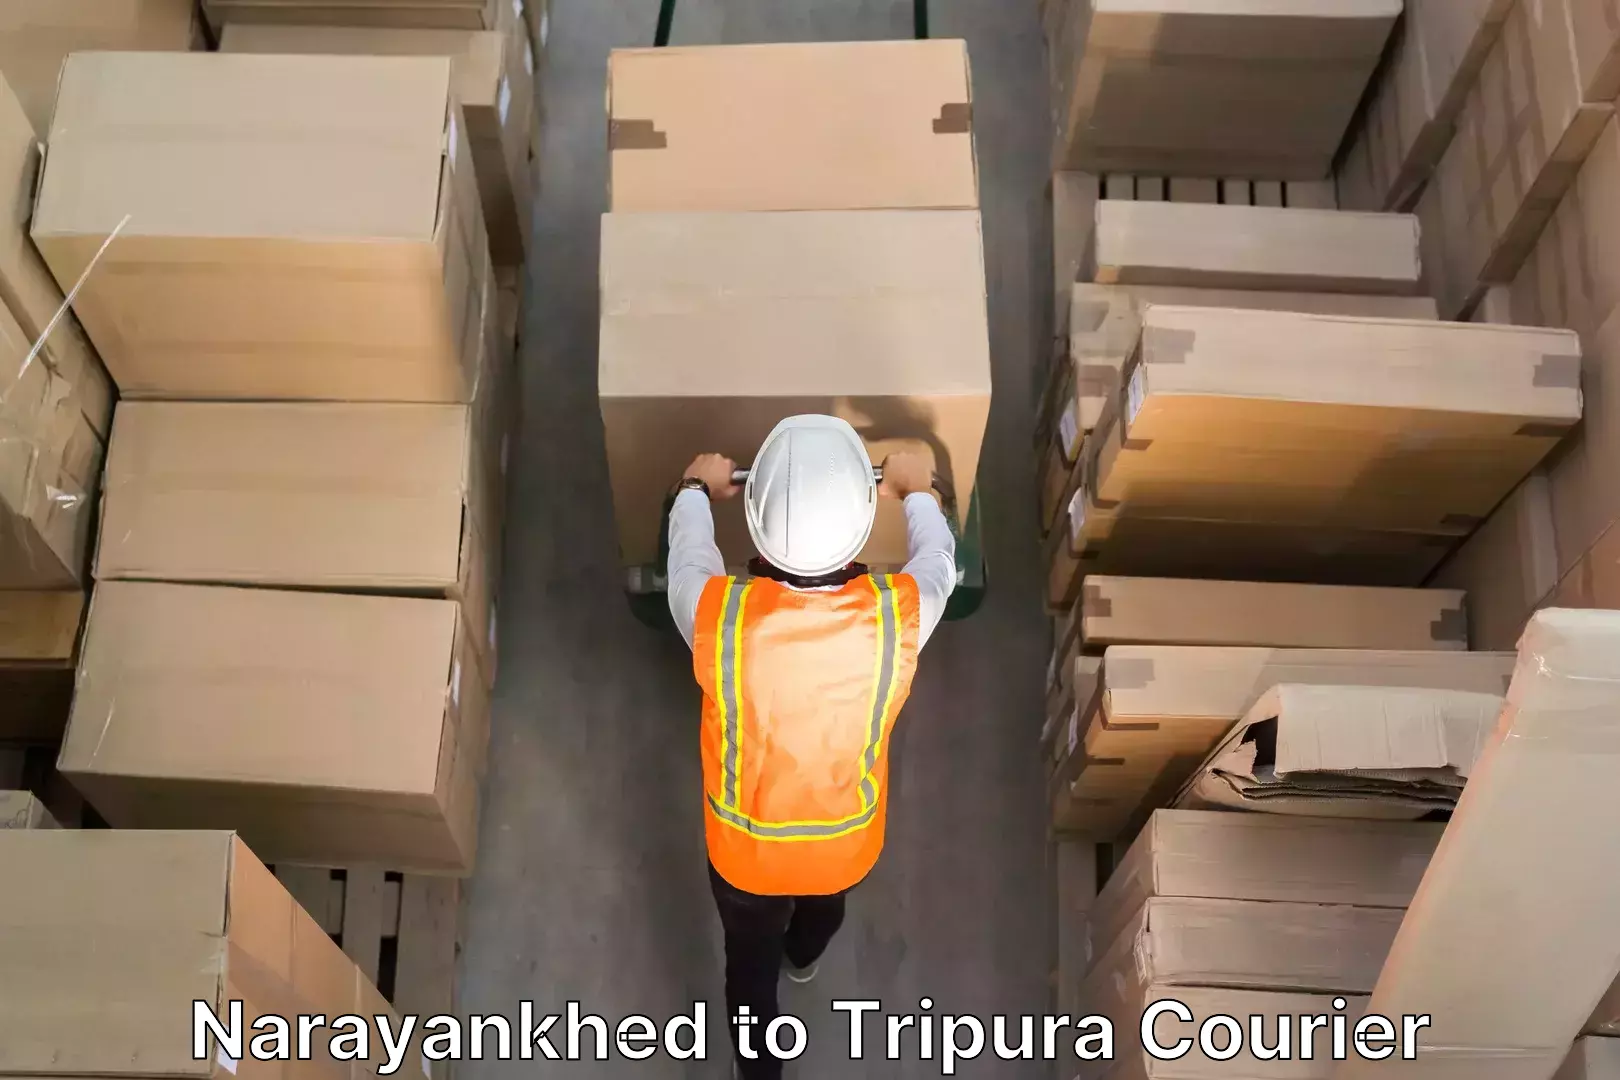 Trusted relocation experts Narayankhed to Tripura